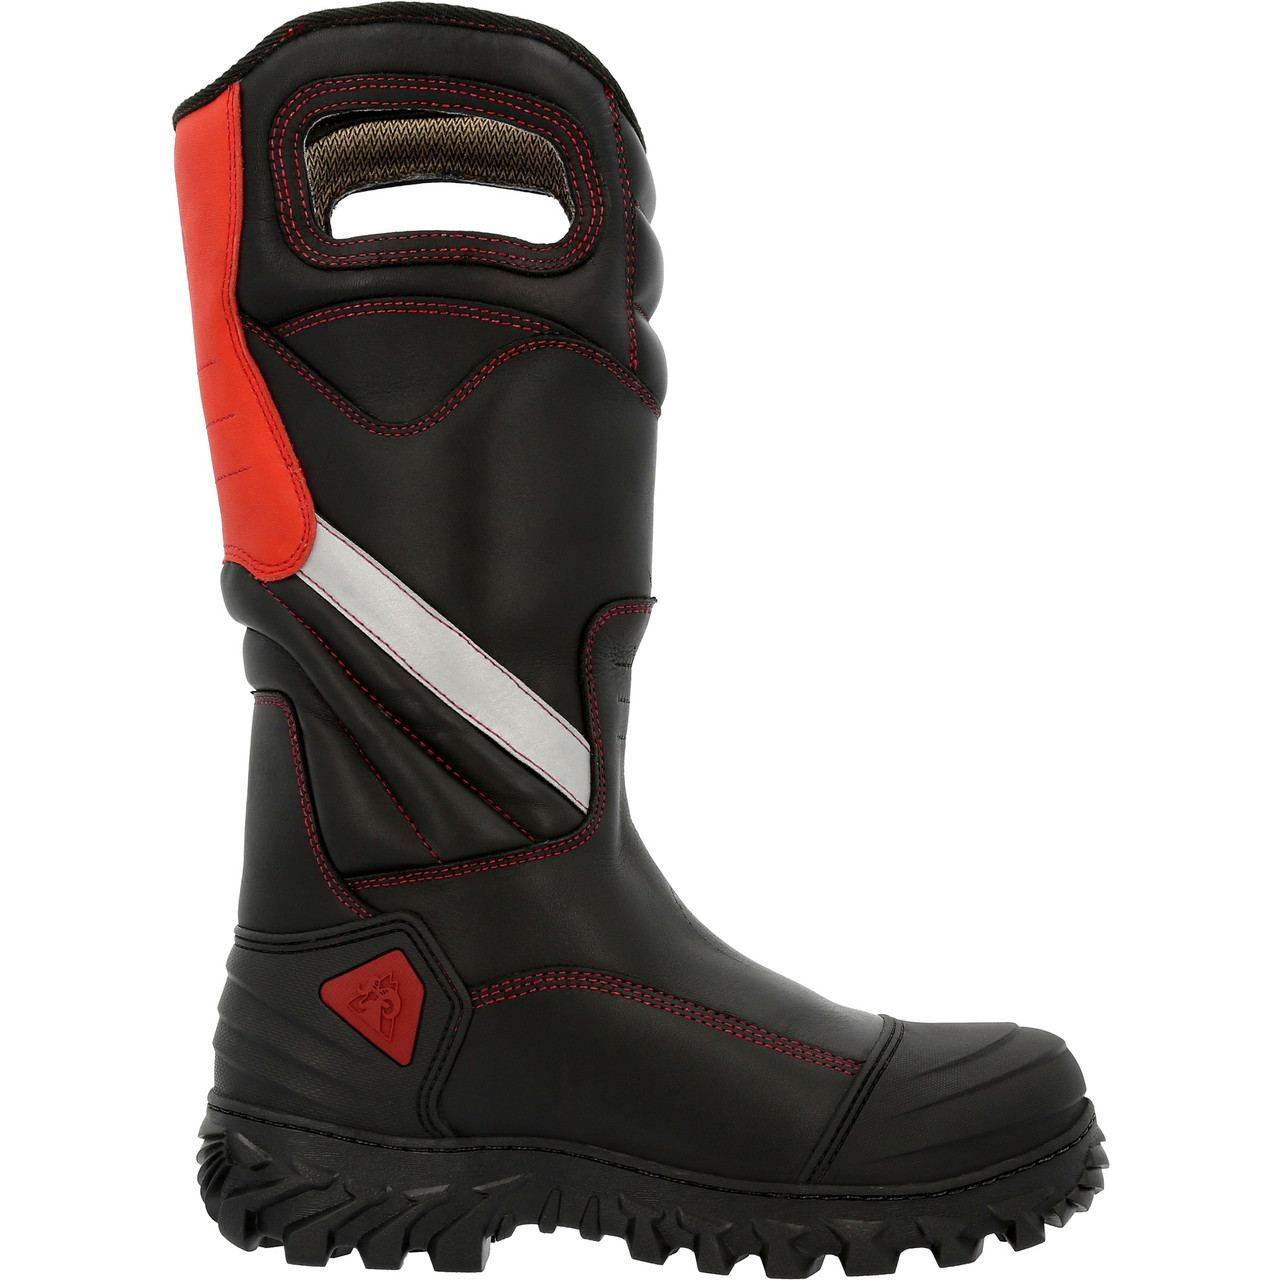 ROCKY CODE RED STRUCTURE NFPA RATED COMPOSITE TOE FIRE BOOTS RKD0087